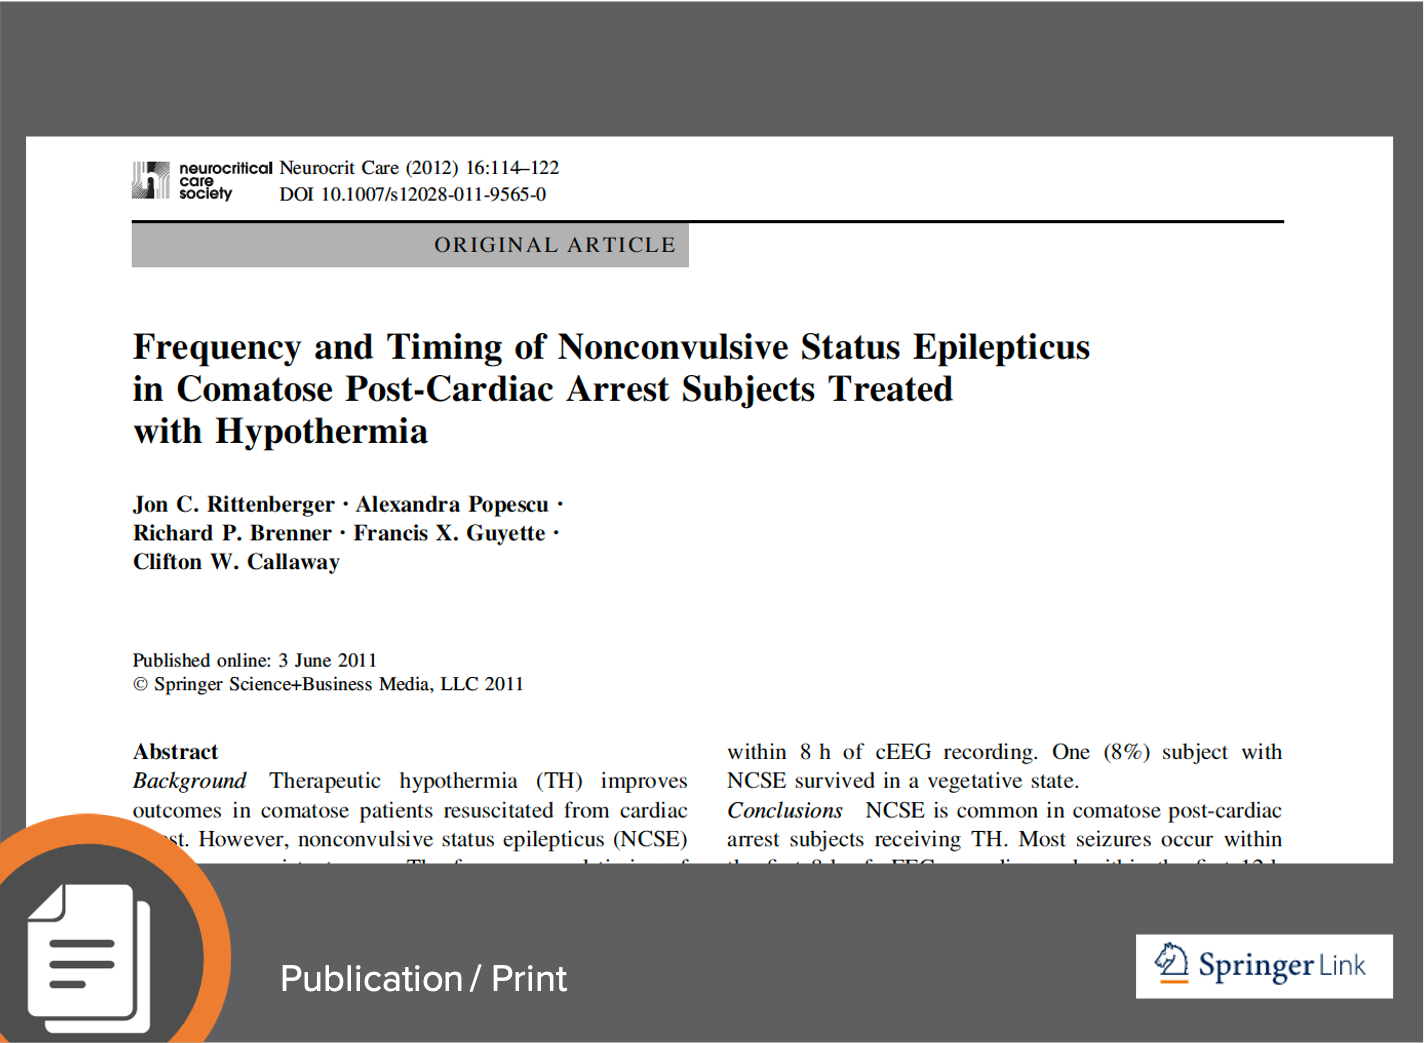 Frequency and Timing of Nonconvulsive Status Epilepticus in Comatose Post-Cardiac Arrest Subjects Treated with Hypothermia